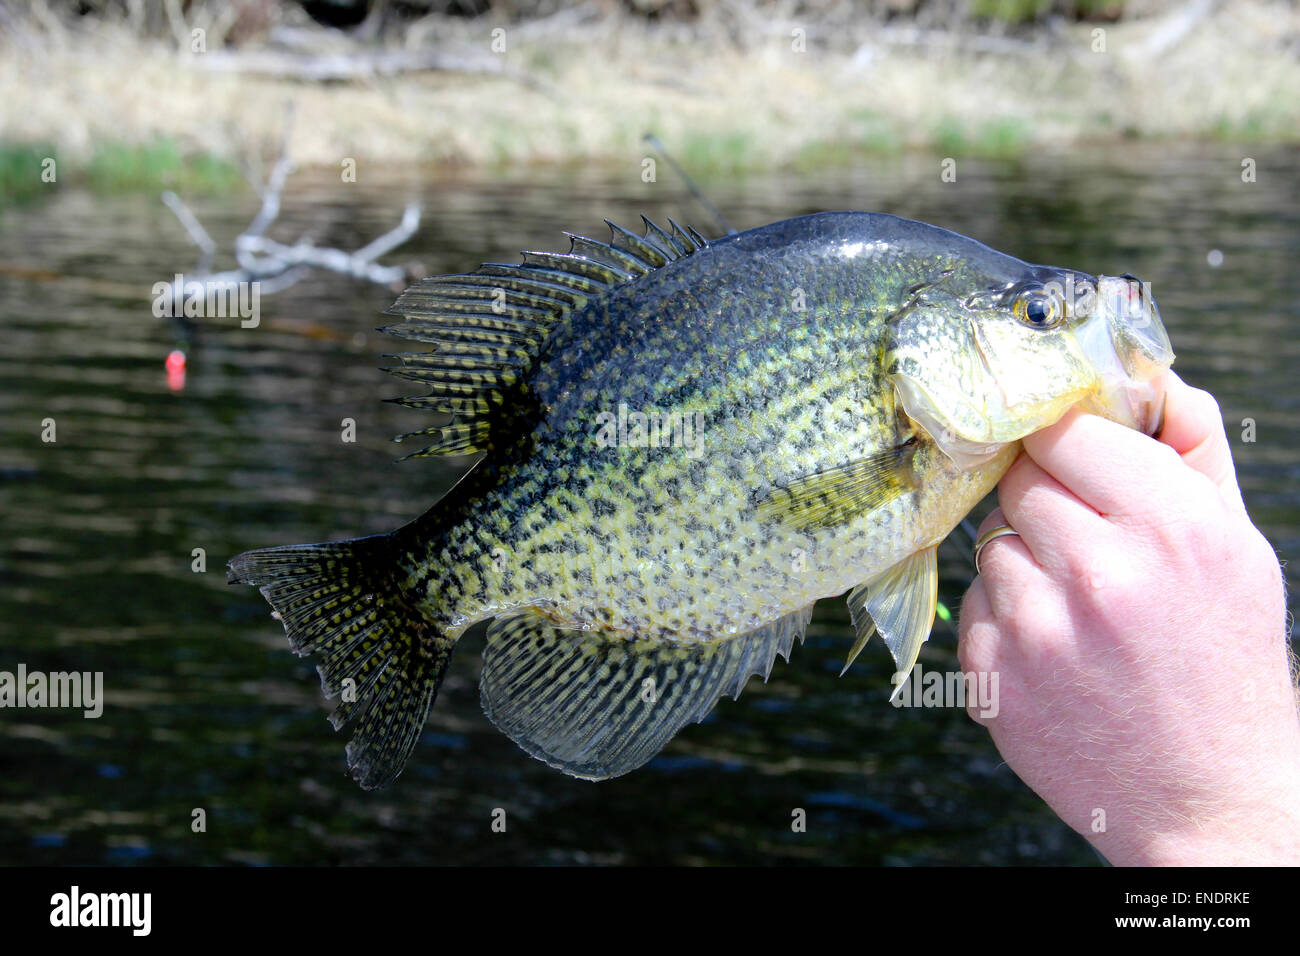 Freshwater Crappie close up with a lake and bobber in the